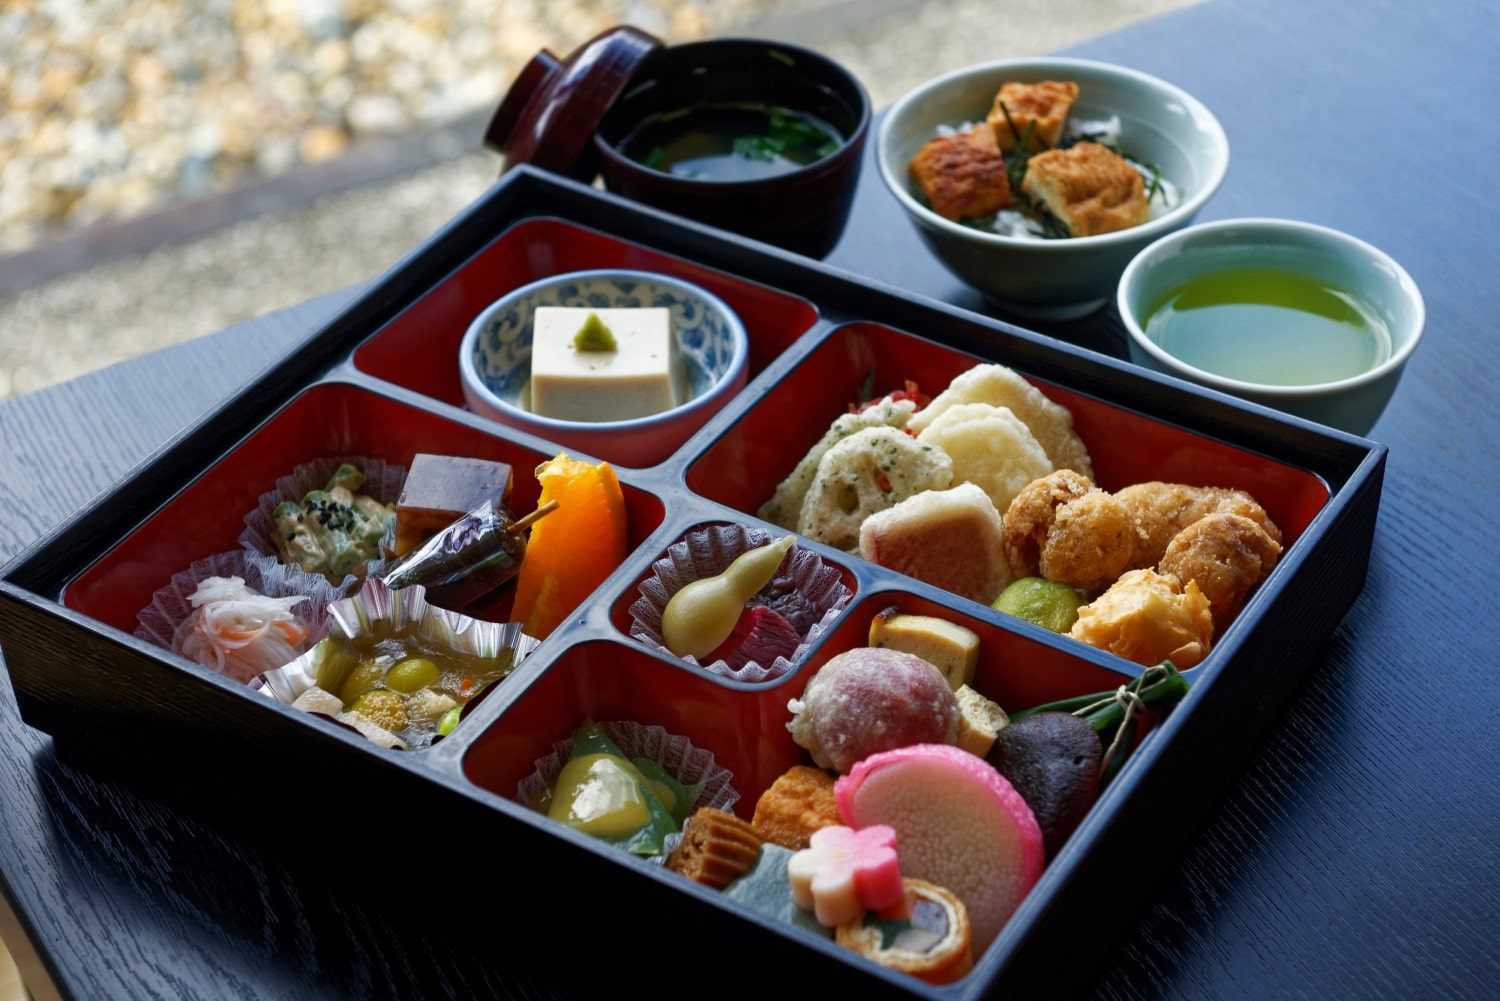 the O-bento style (lunch box style)